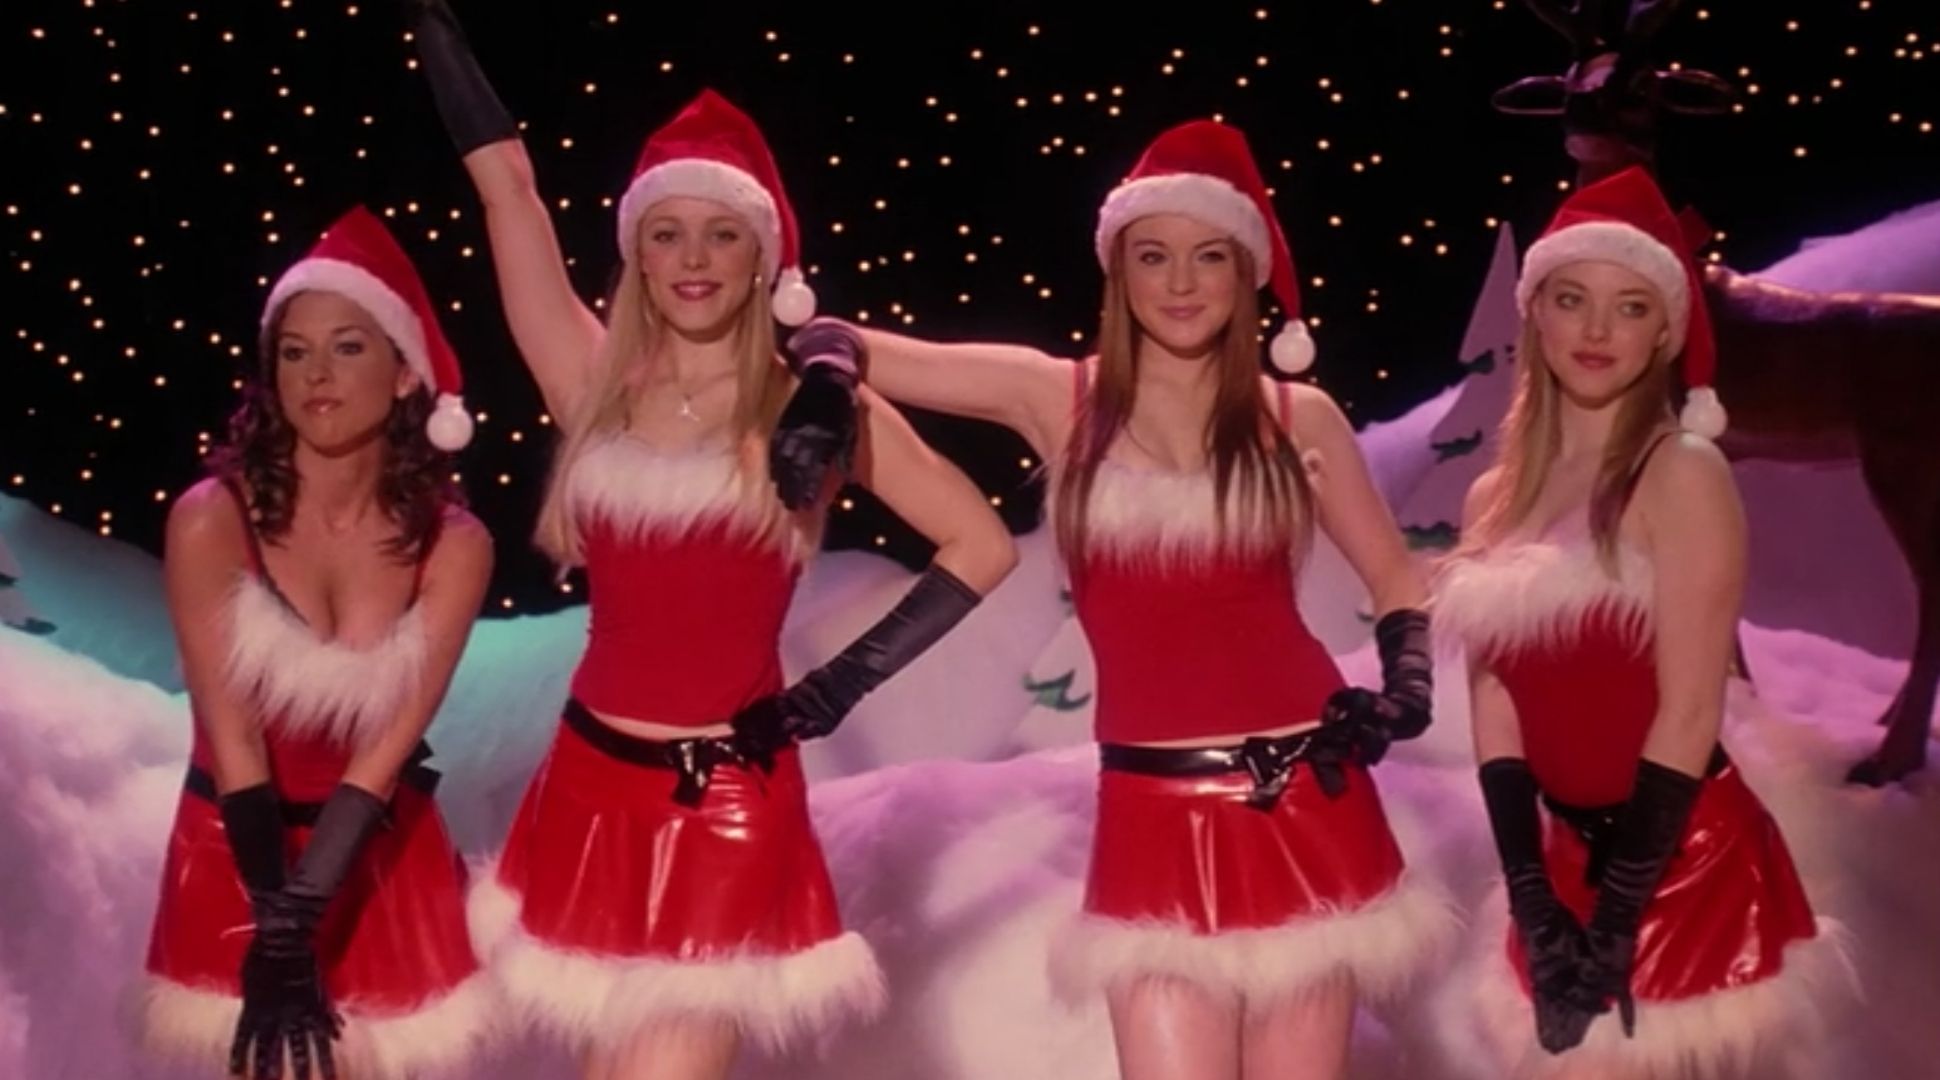 14 of the most iconic fashion moments from Mean Girls | Cosmopolitan ...